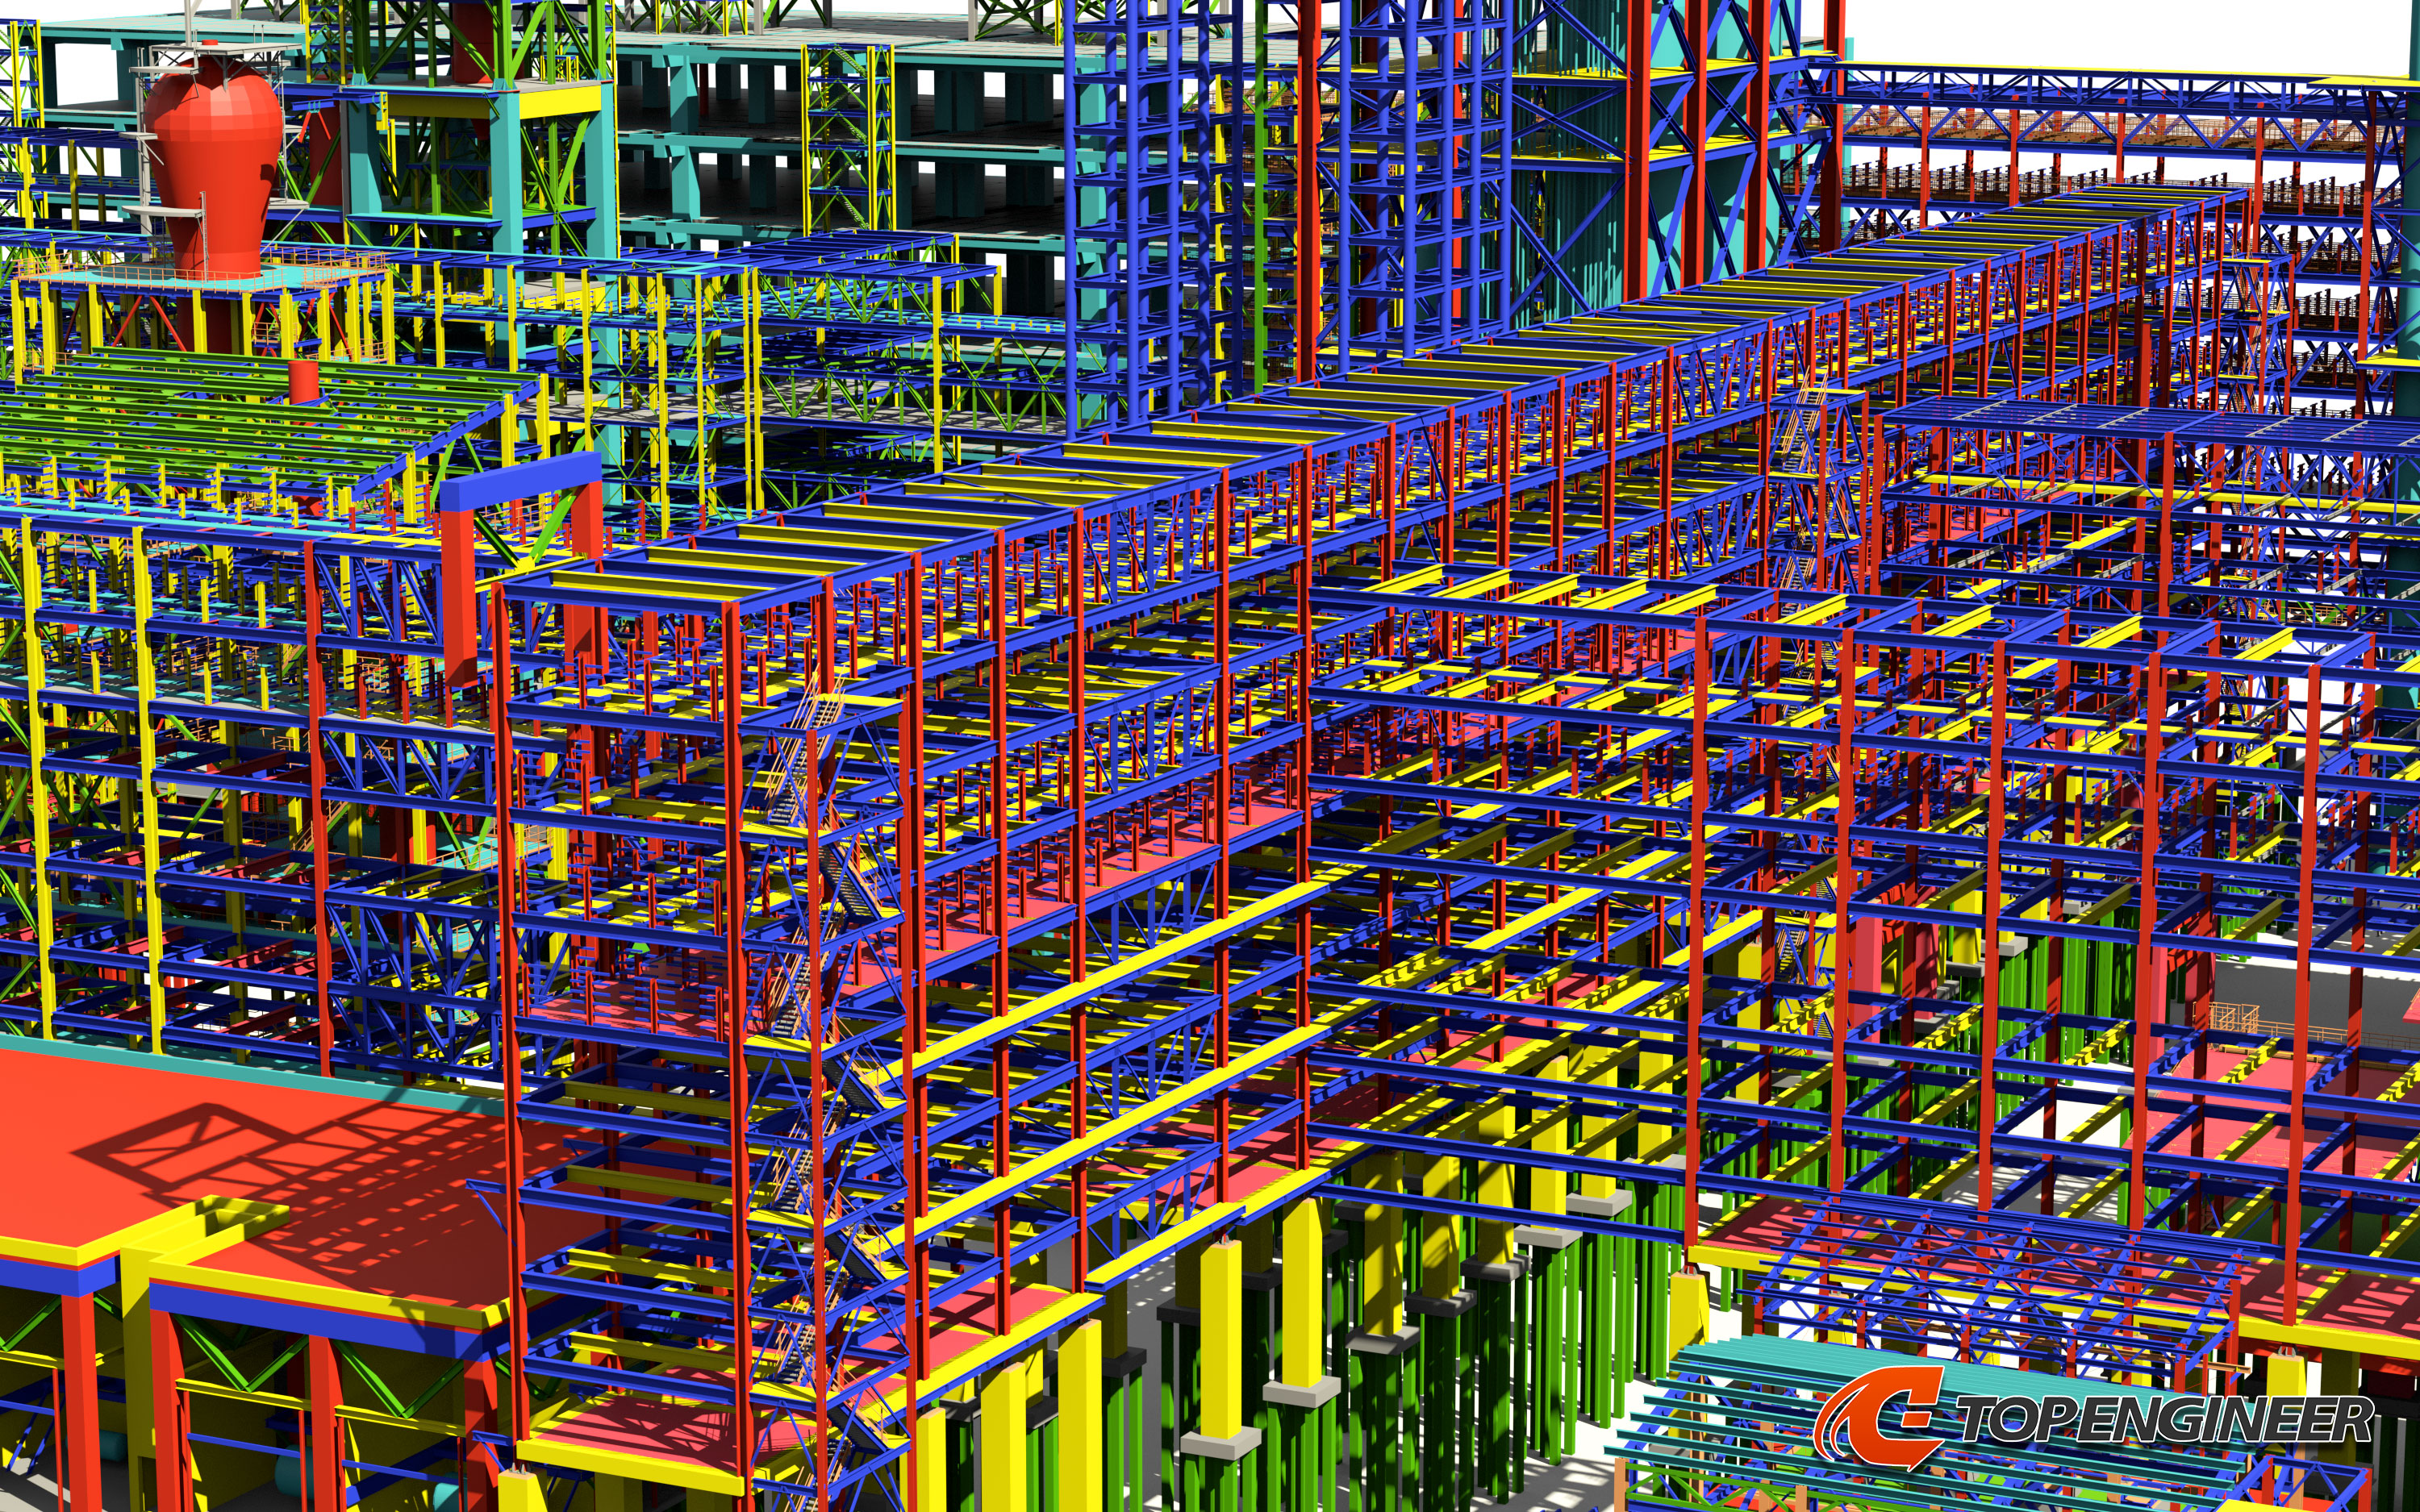 Bim (building information model) for gas processing factory in tekla structures